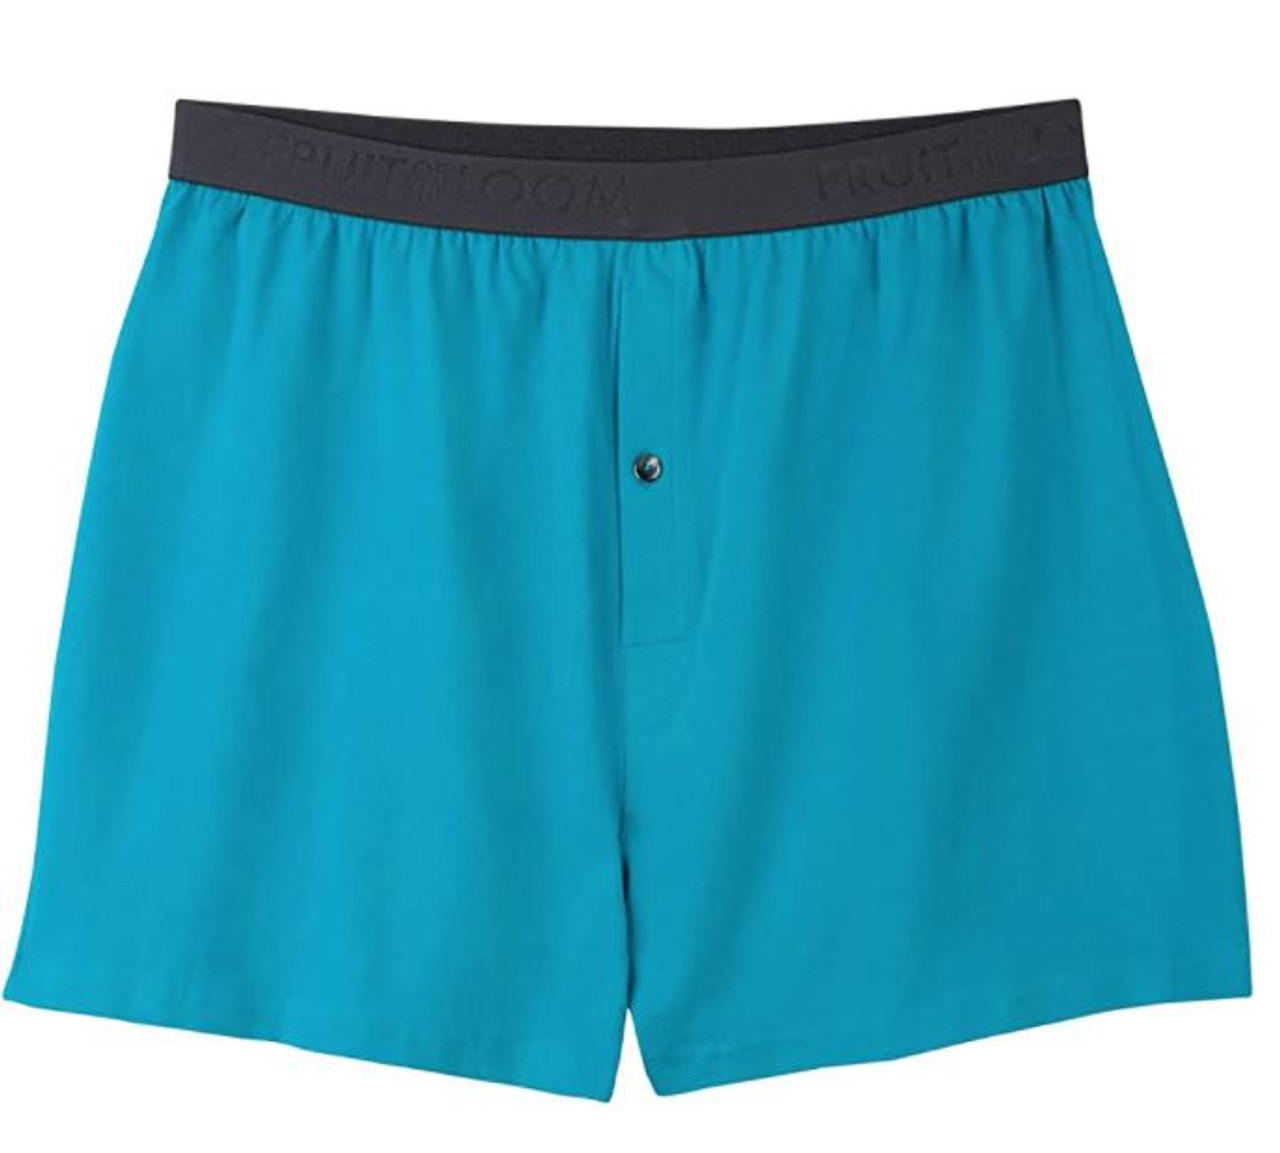 Fruit of the Loom Men's Select Breathable Micro-Mesh Tagless Boxer